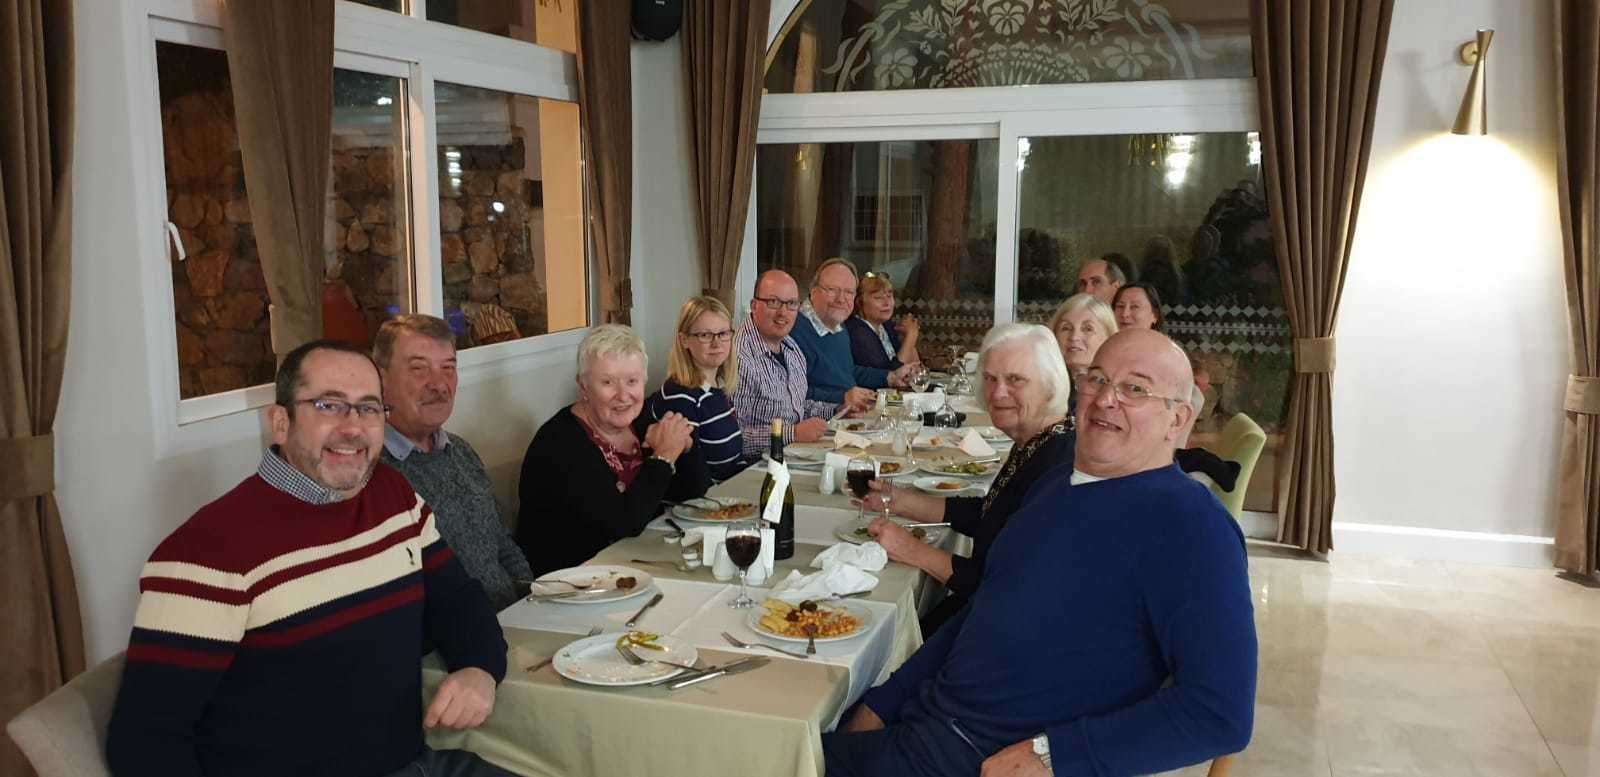 Linda and Grant, at the far end of the table, with their fellow Brits stuck in Cyprus. This is them in their new accommodation enjoying their first meal outside of their quarantined hotel room in 15 days